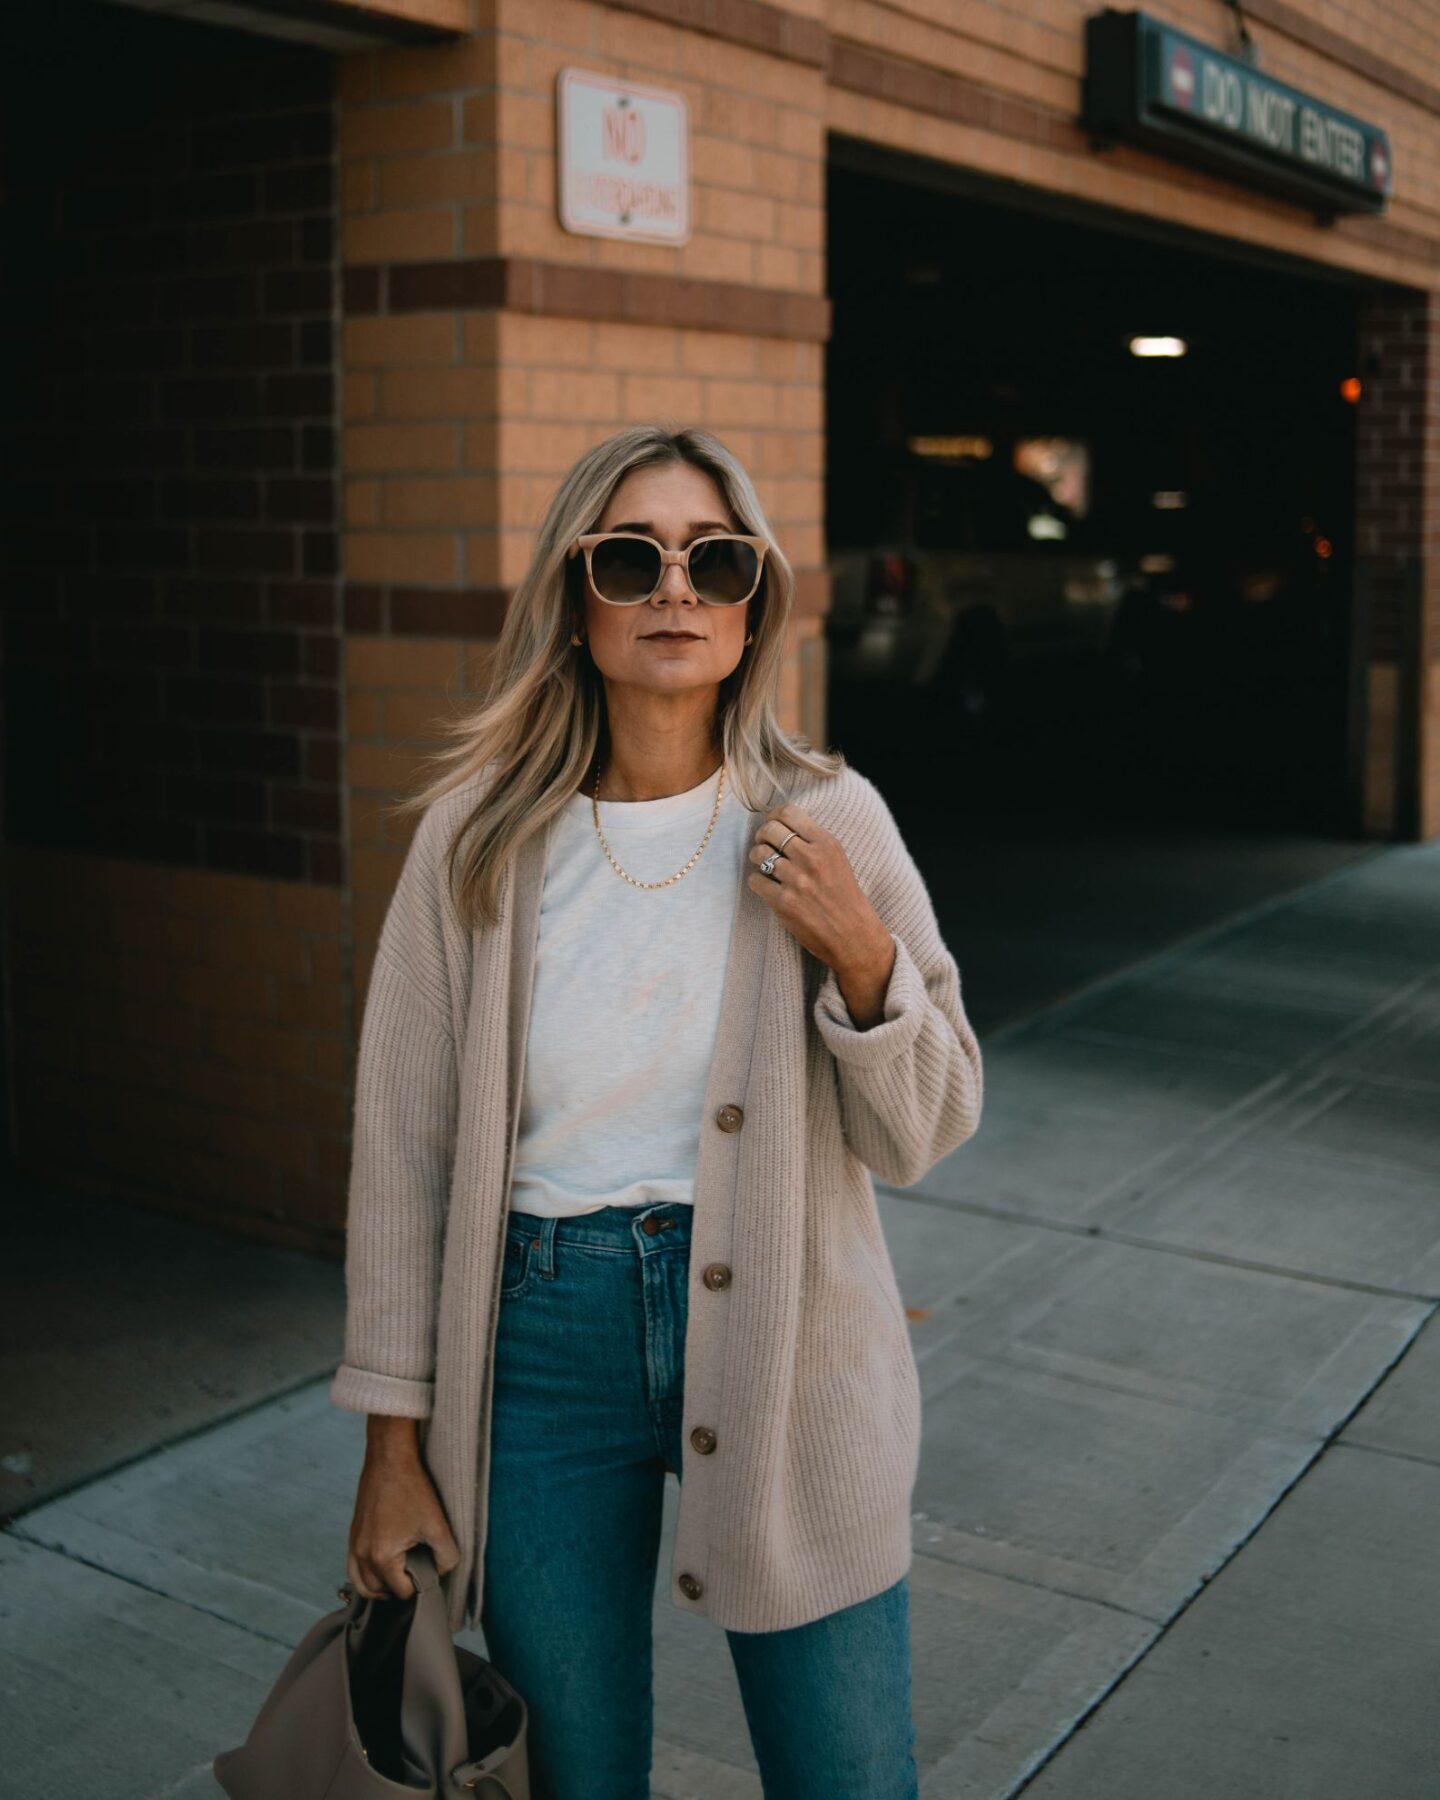 karin emily wearing the jenni kayne cozy sweater for fall with a cream tee and madewell perfect vintage jeans and a pair of clear sunglasses